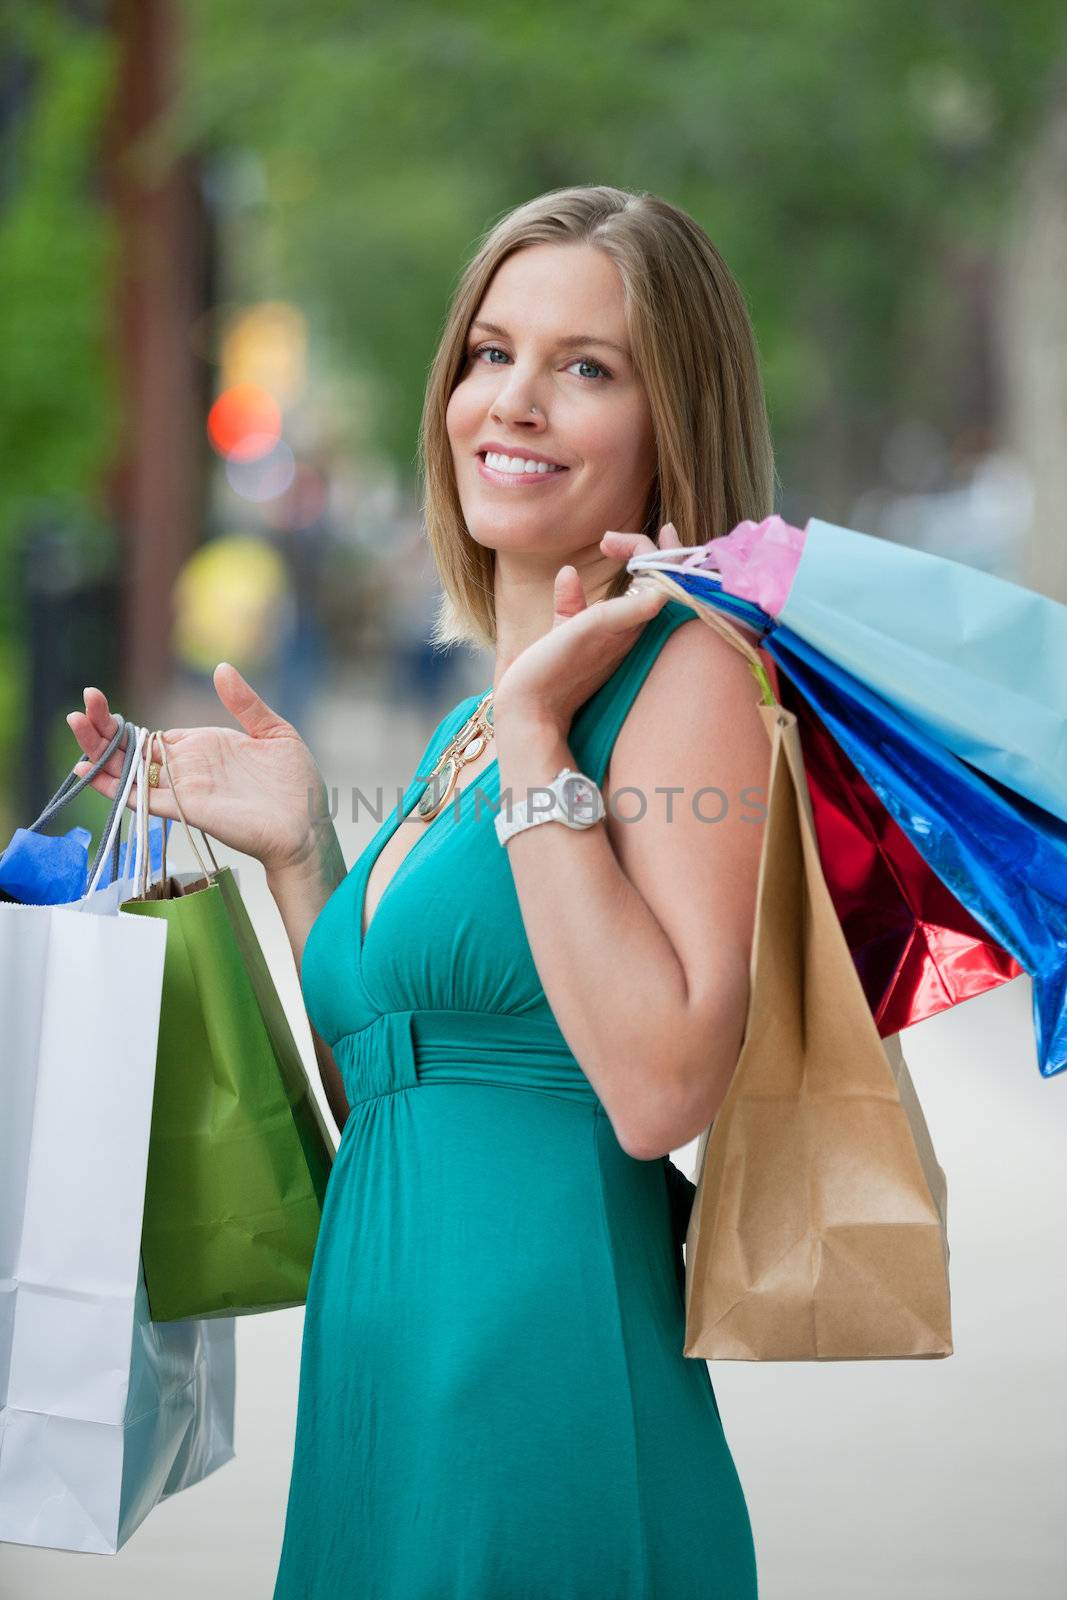 Woman Carrying Shopping Bags by leaf